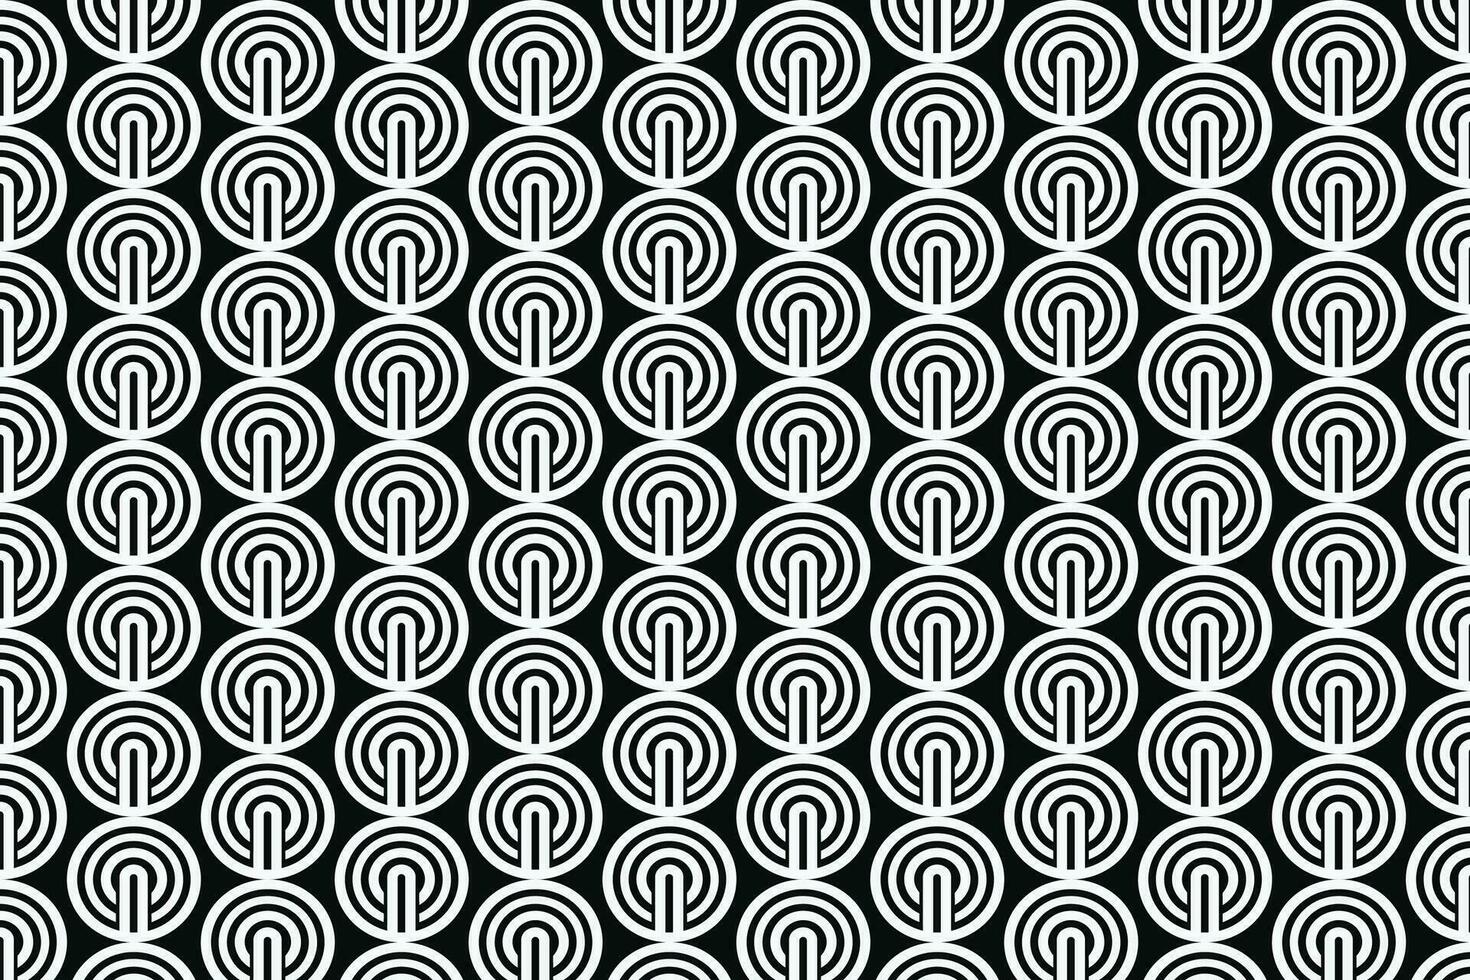 Black and White Geometric Pattern with Repeating Nested Circles vector